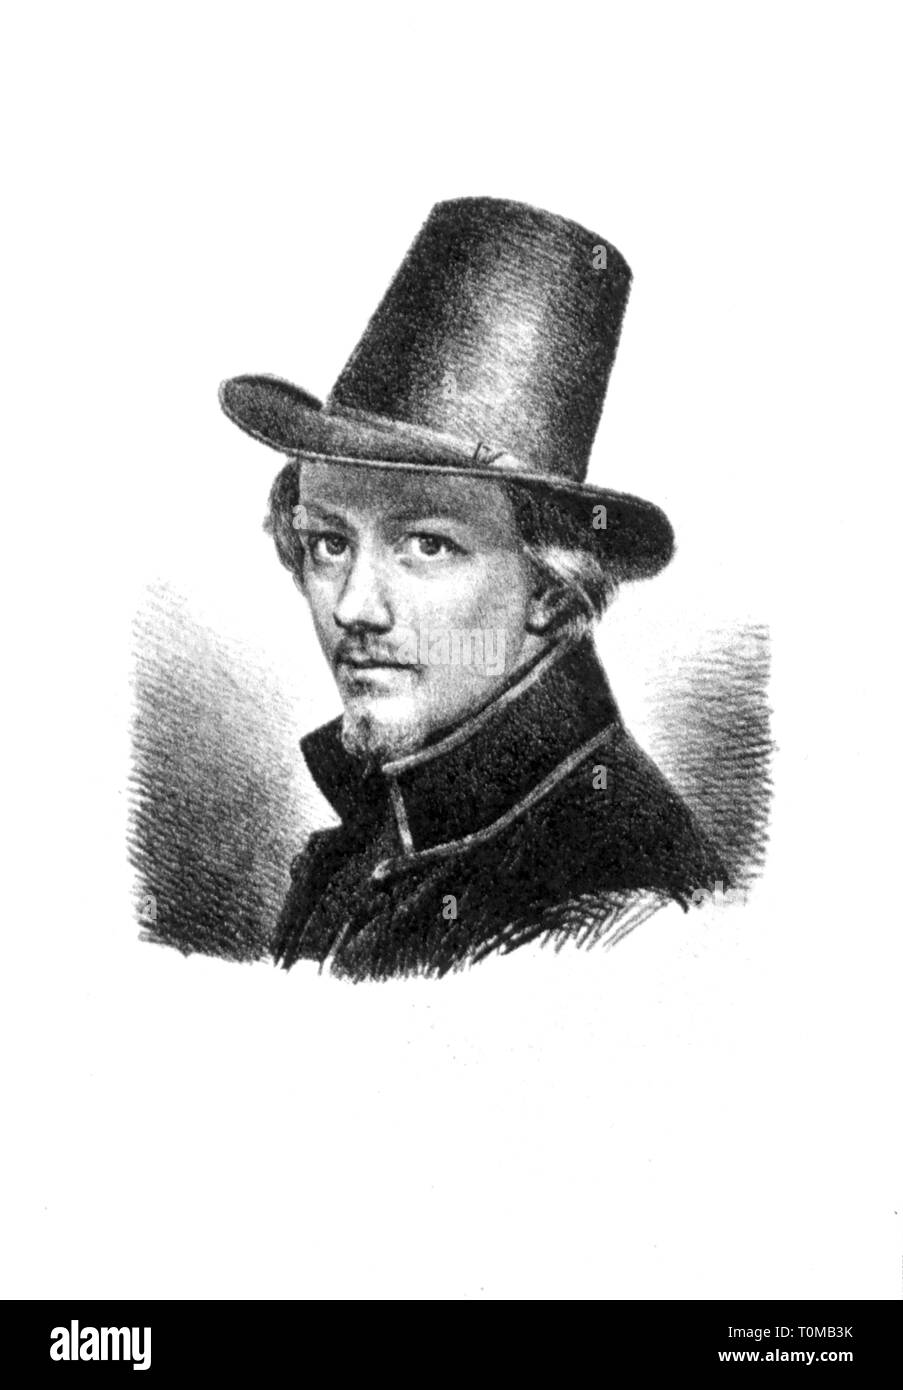 fashion, 19th century, man with hat, engraving, early 19th century, 19th century, graphic, graphics, men's fashion, accessory, accessories, hat, hats, headpiece, headpieces, portrait, moustache, mustache, moustaches, mustaches, historic, historical, man, men, male, people, Additional-Rights-Clearance-Info-Not-Available Stock Photo